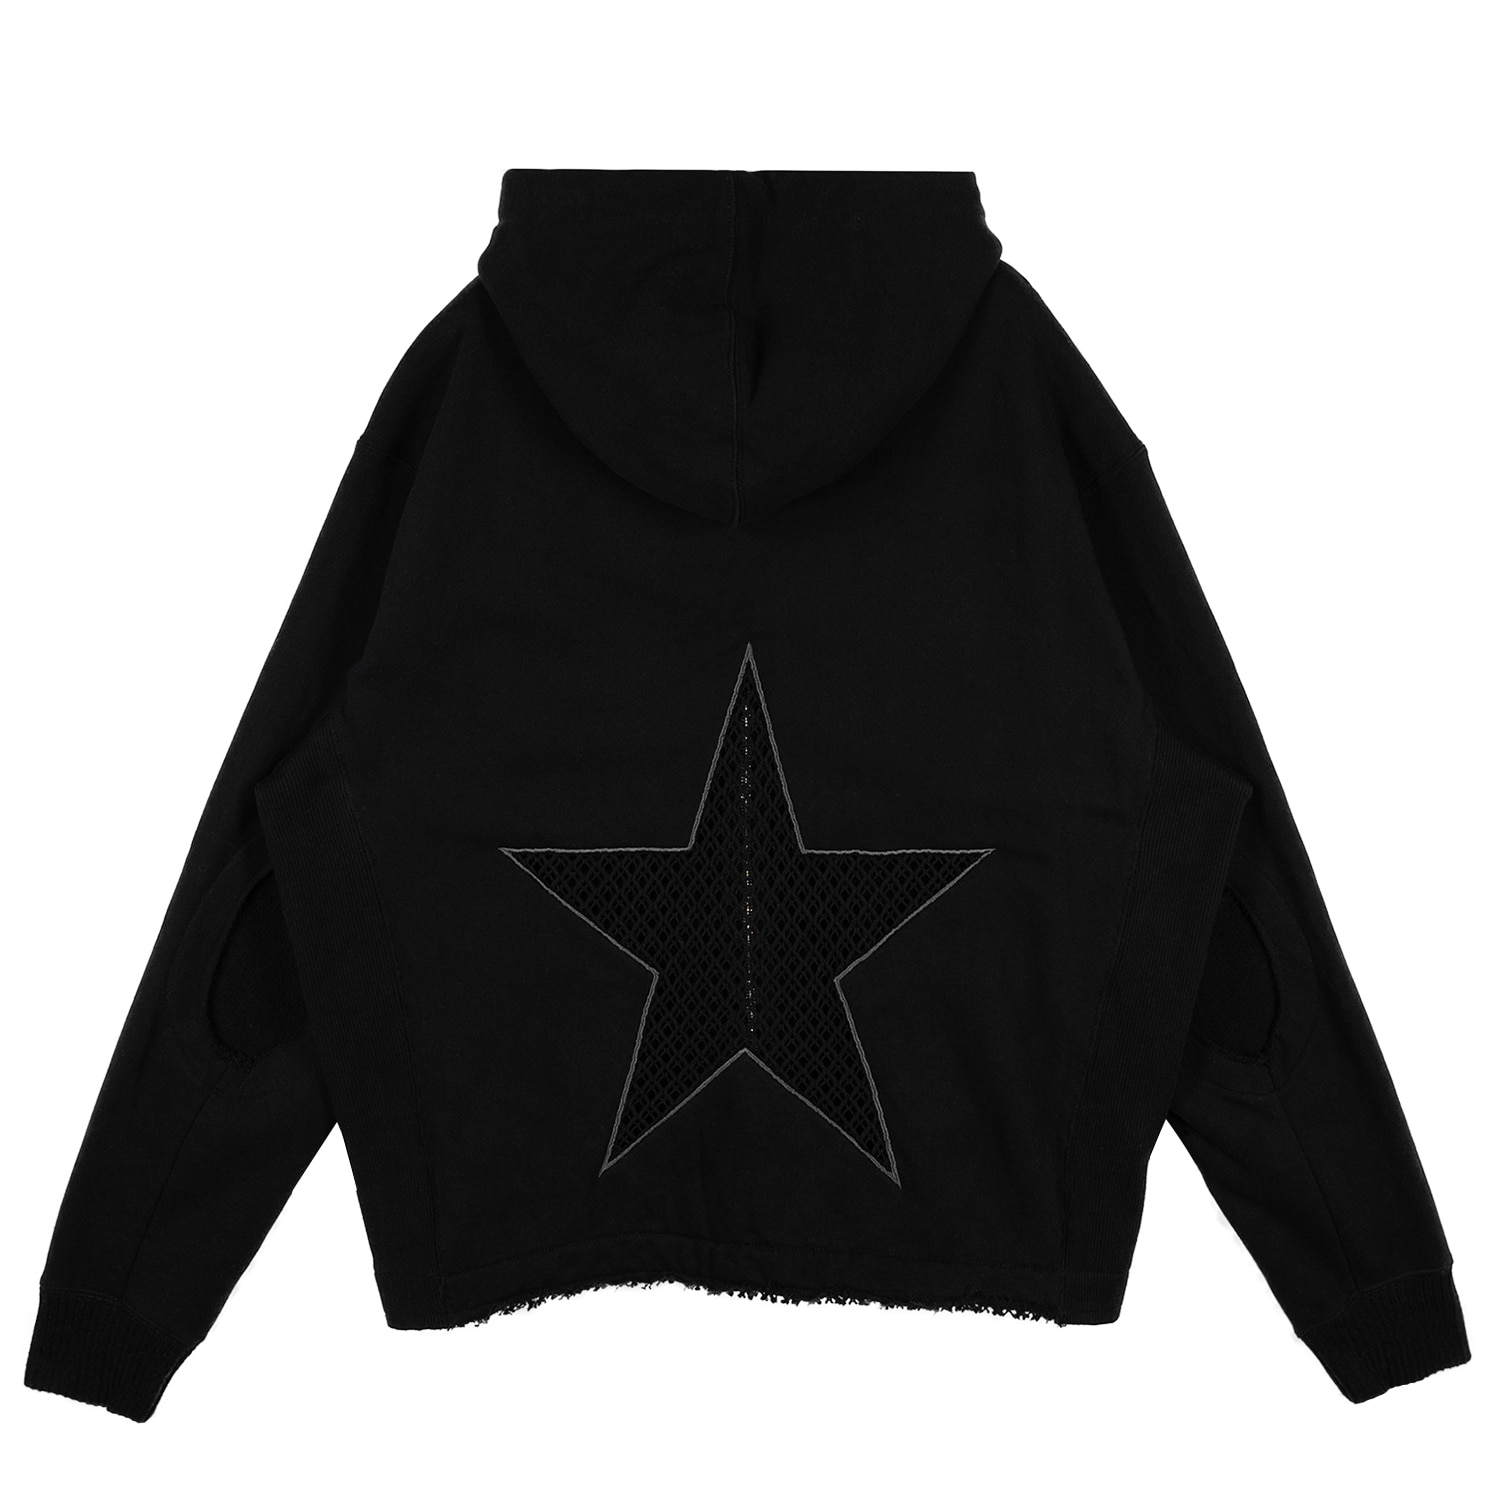 ELBOW CUT OUT WITH STAR NET ZIP HOODIE (BLACK)